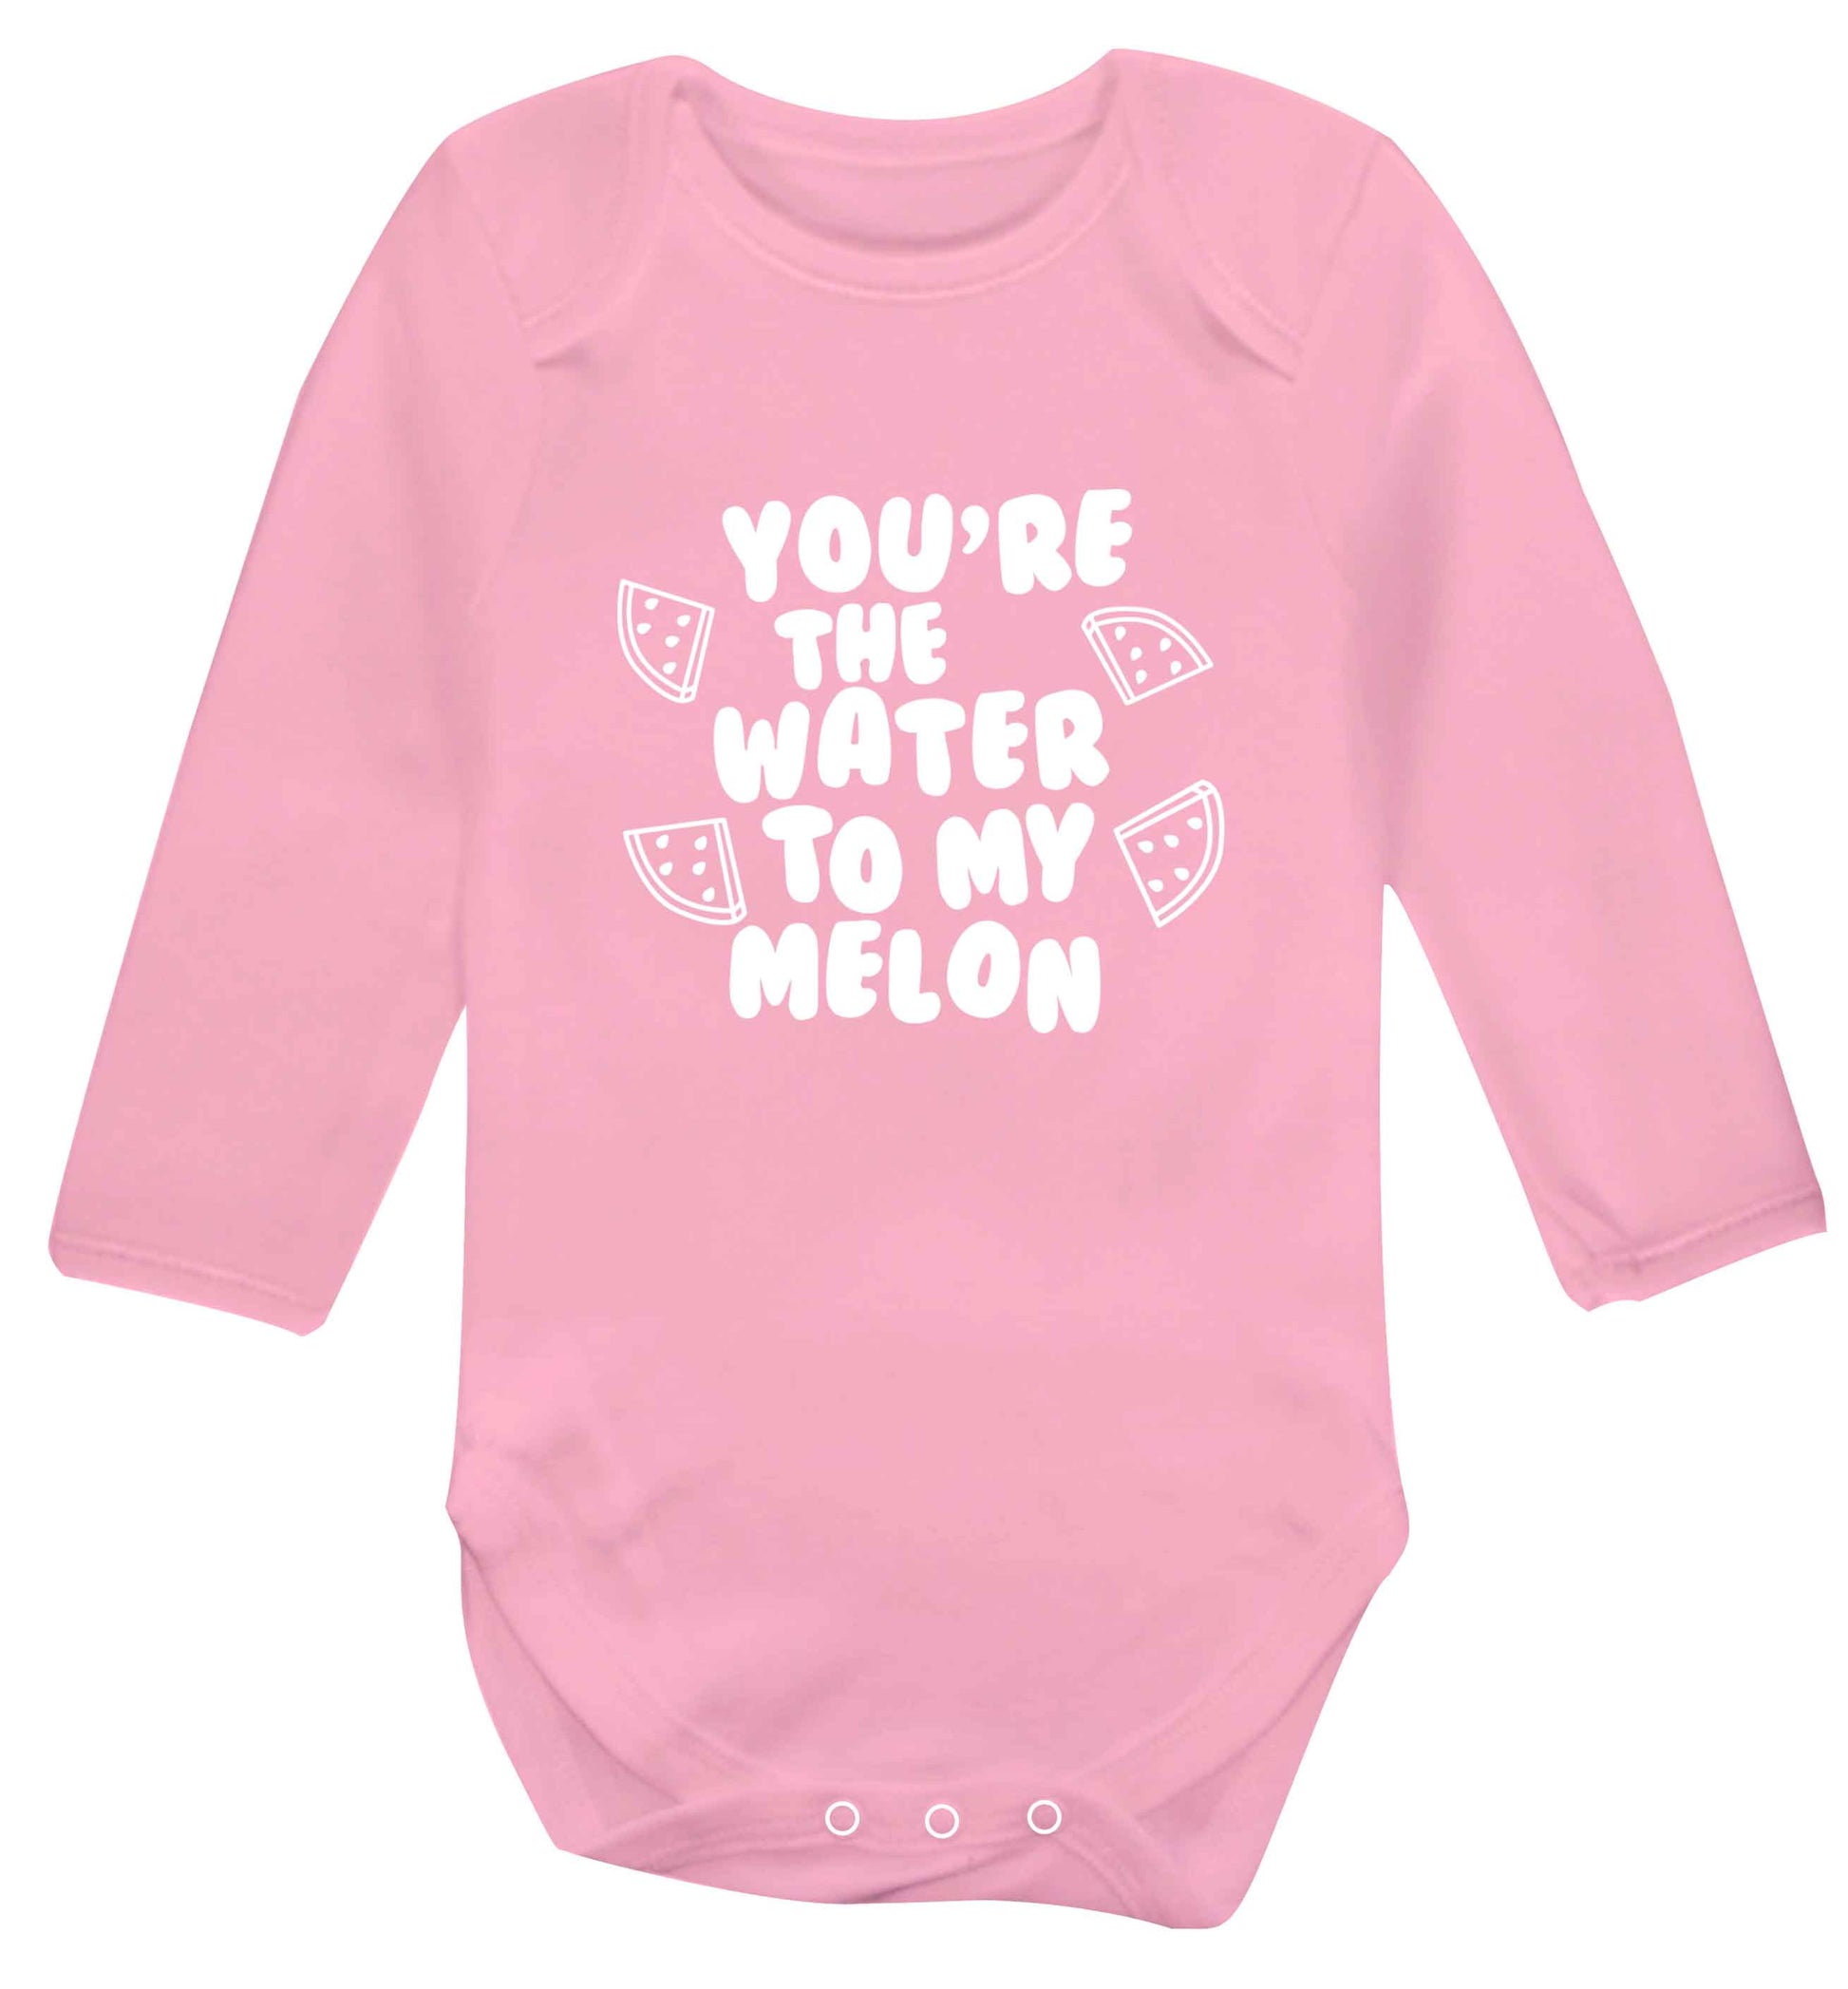 You're the water to my melon baby vest long sleeved pale pink 6-12 months